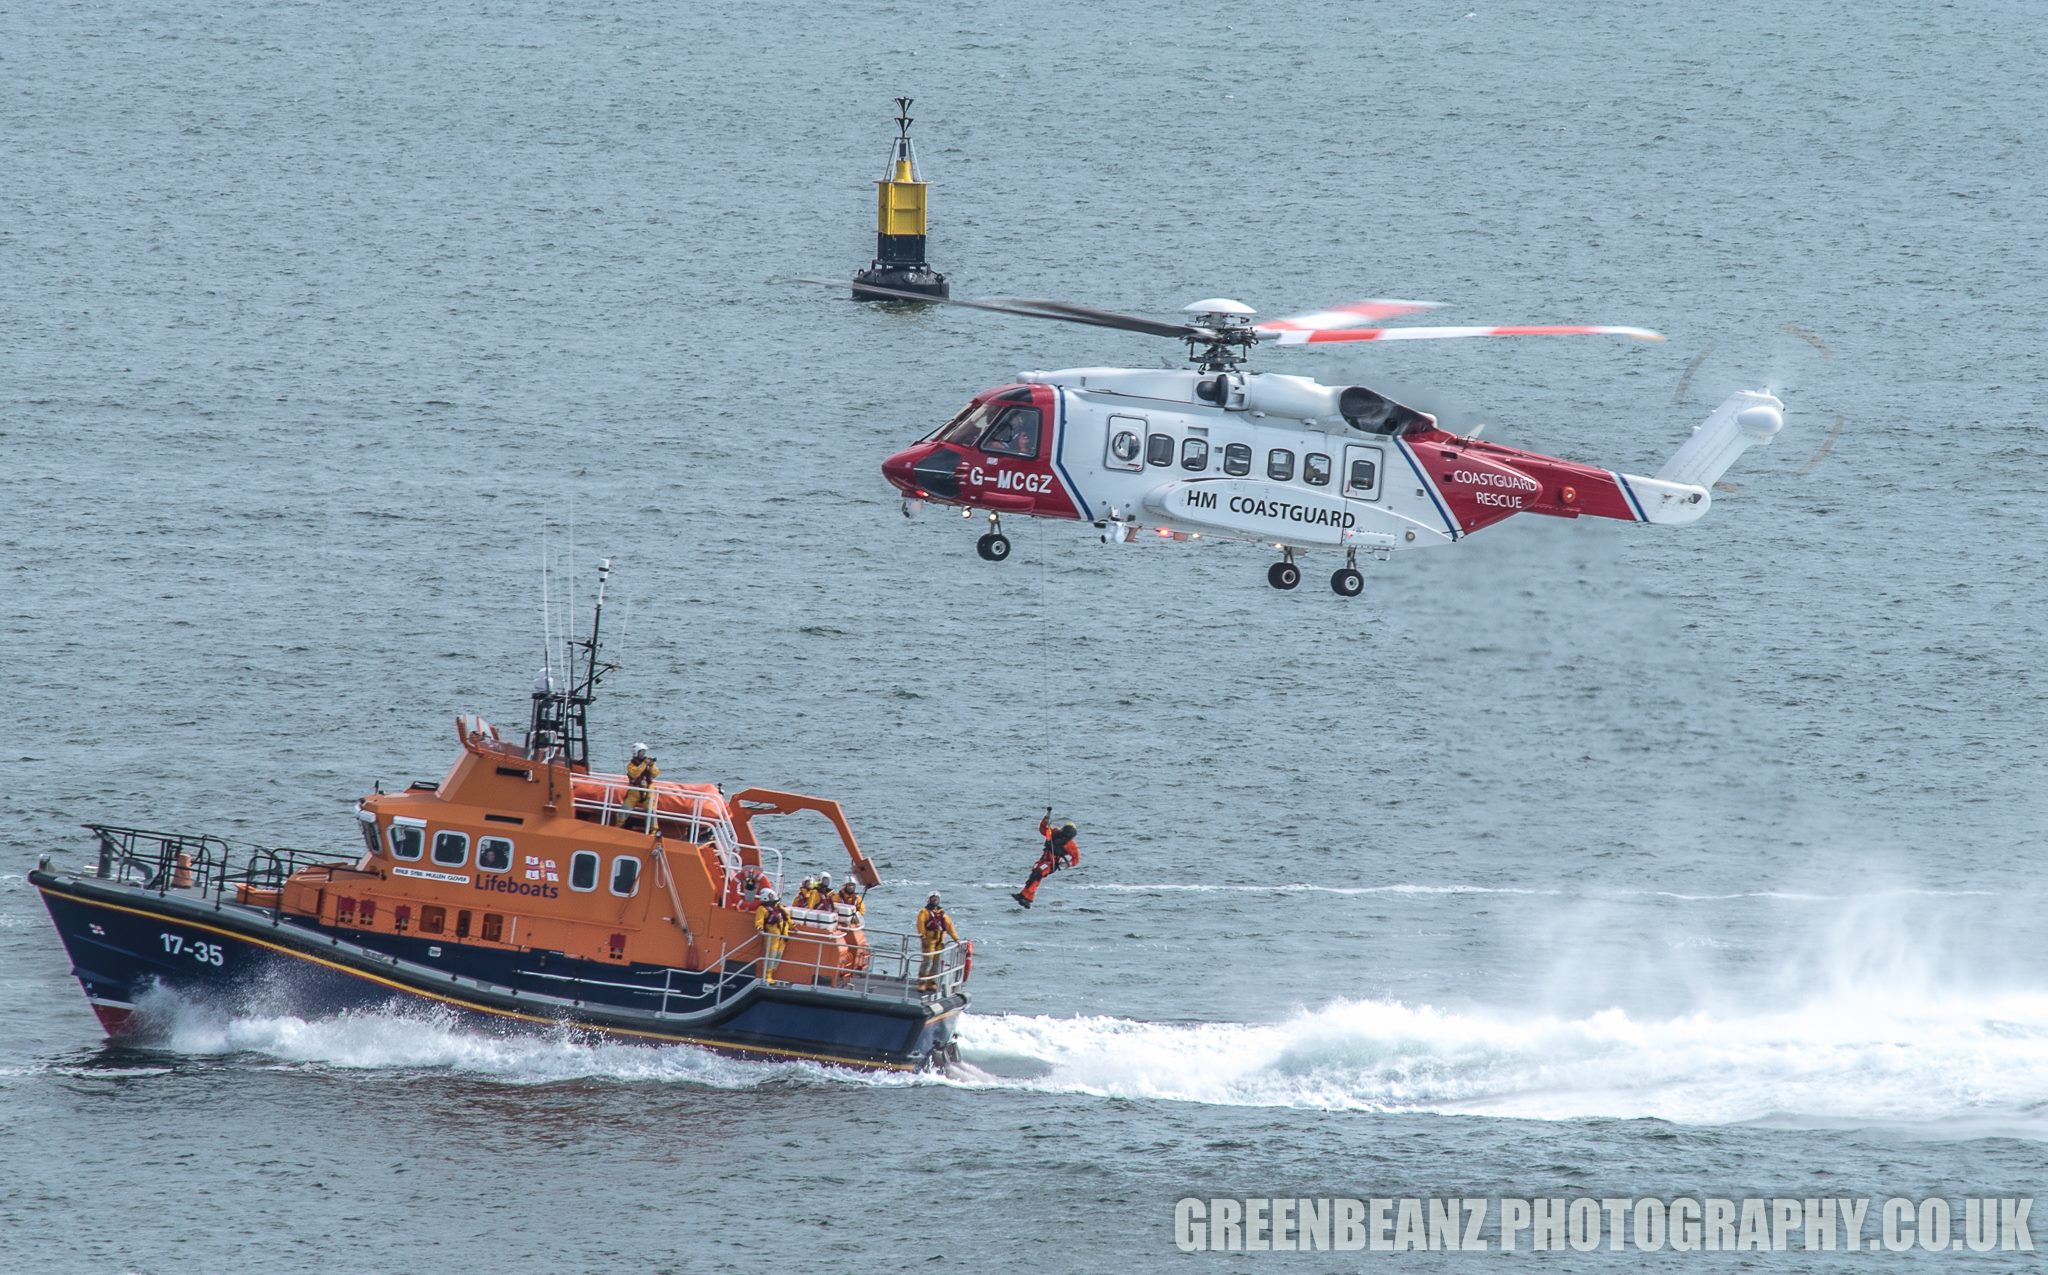 Air Display by the RNLI during Plymouth's Armed Forced Day in 2018